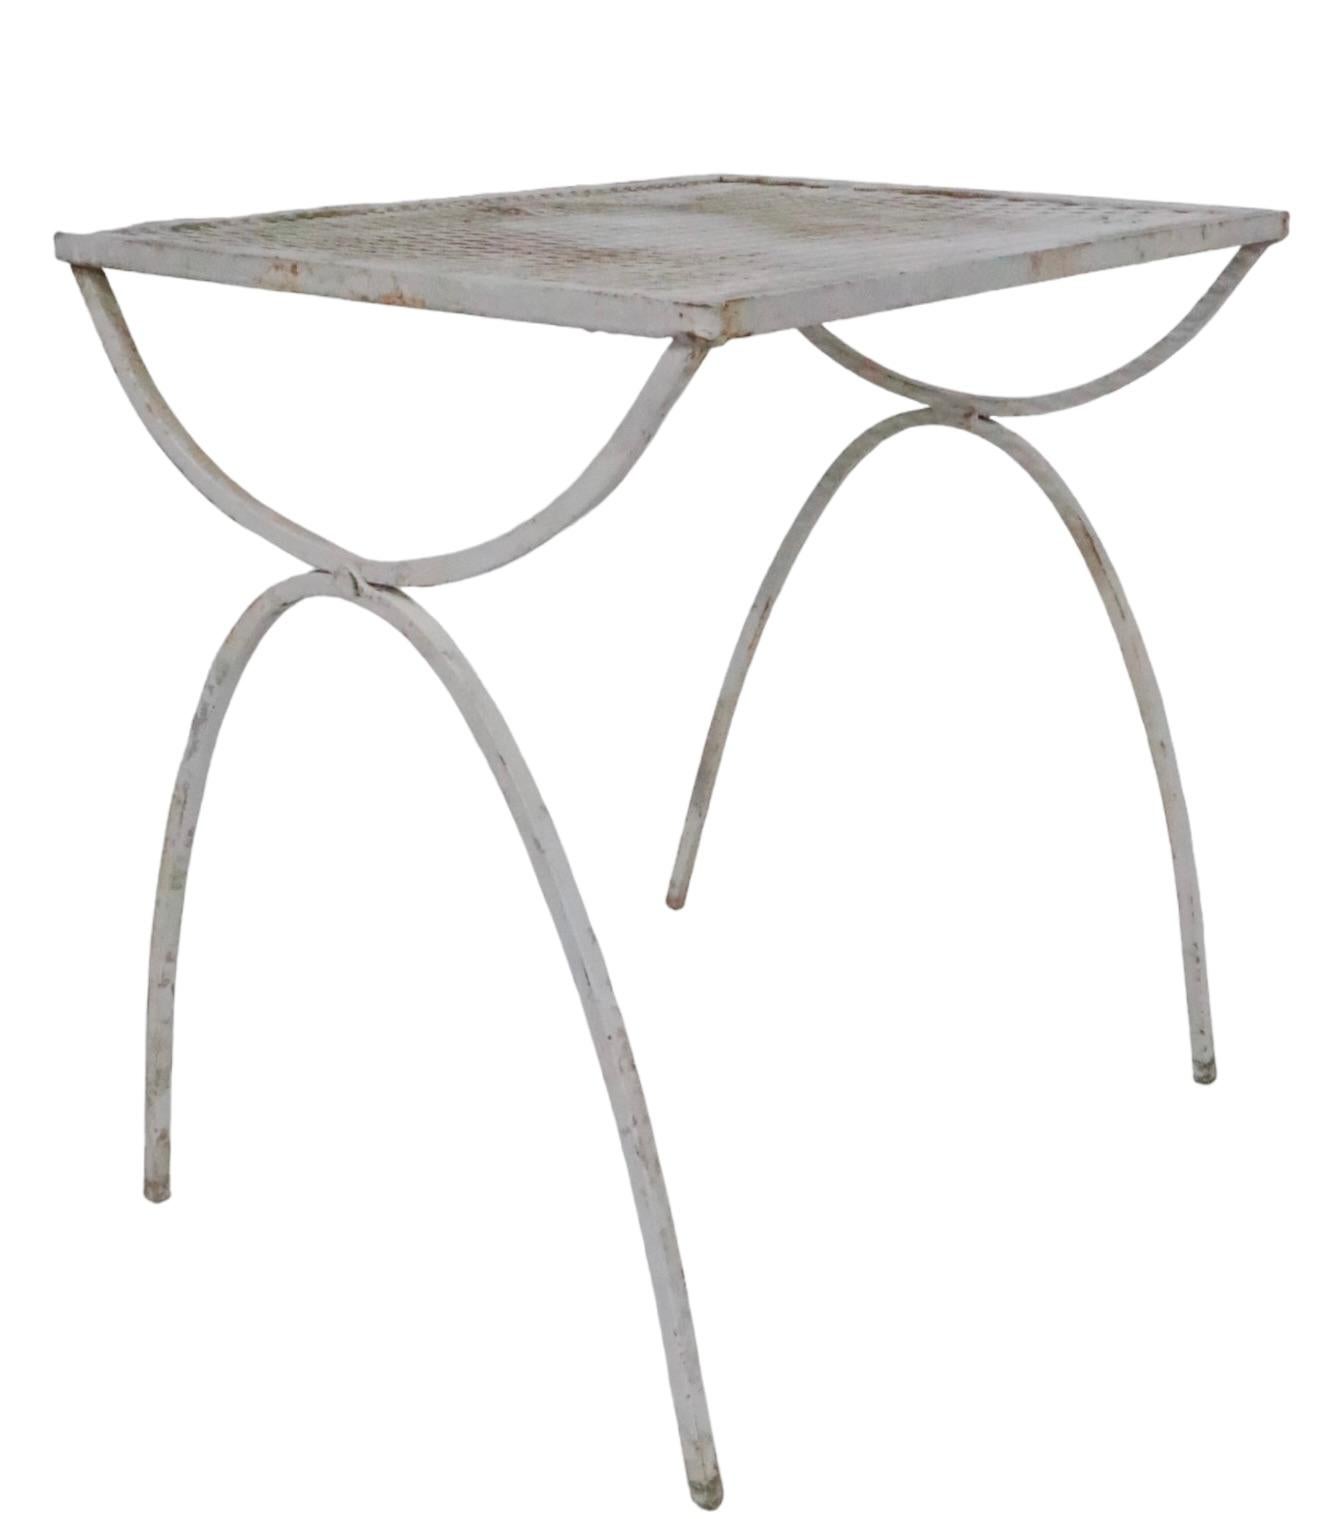 Architectural Mid Century vintage side, or end table, having a wrought iron base and frame, with metal mesh top. Designed by Maurizio Tempestini for Salterini, circa 1950's. The table is currently in later, but not new white paint finish, which